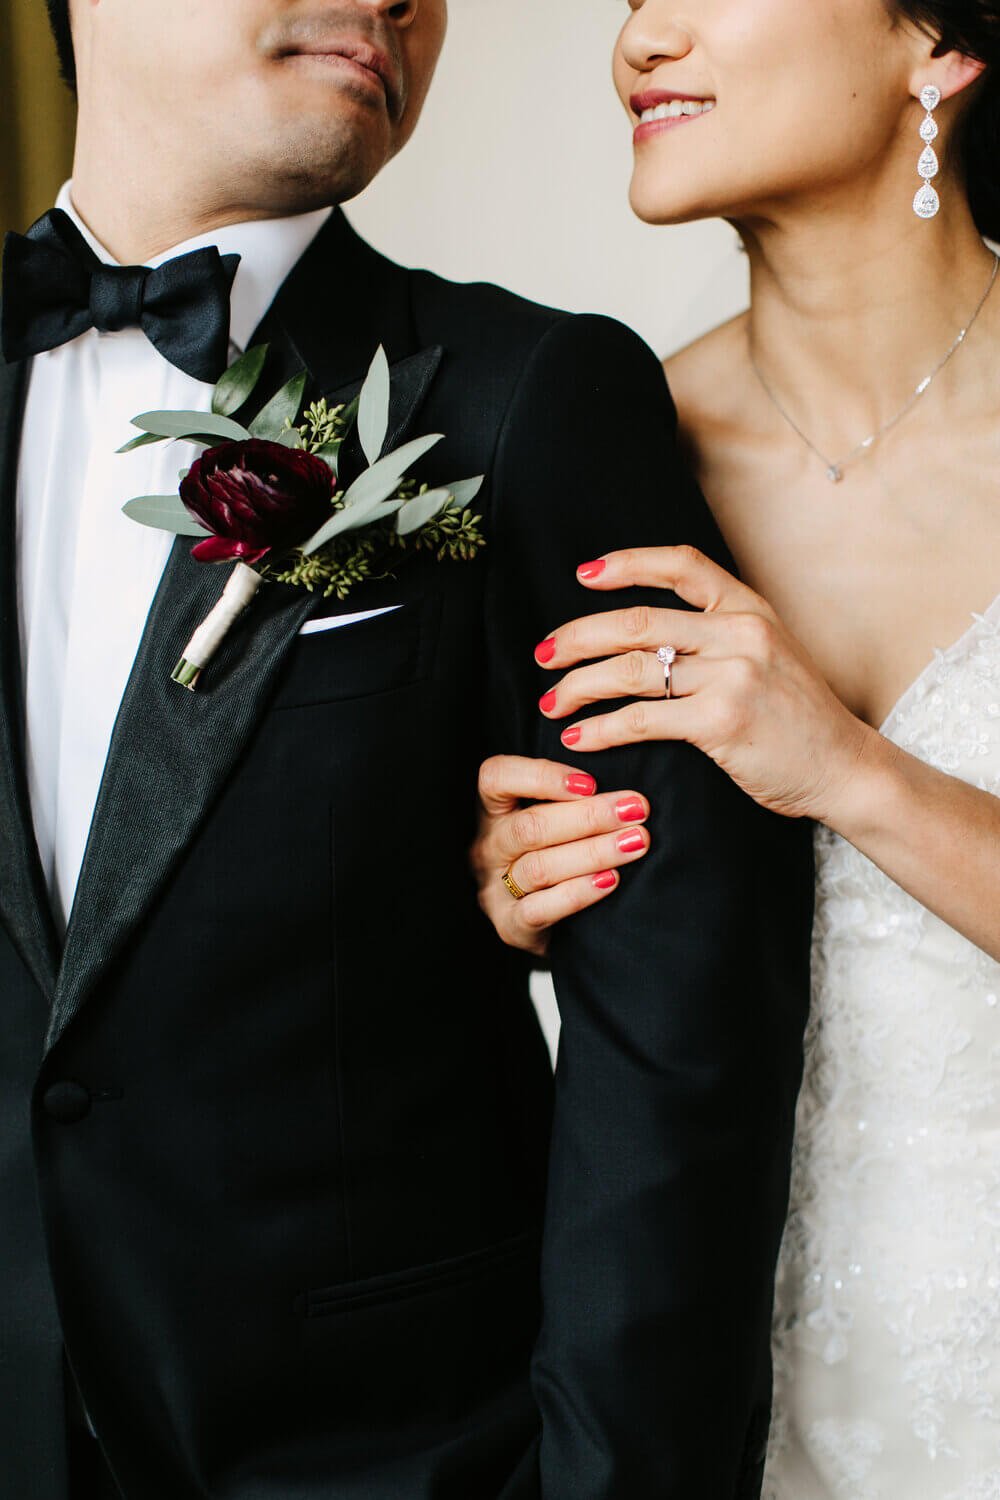 Close-up of a bride and groom, focusing on their loving embrace and the details of the bride's dress and groom's boutonniere.